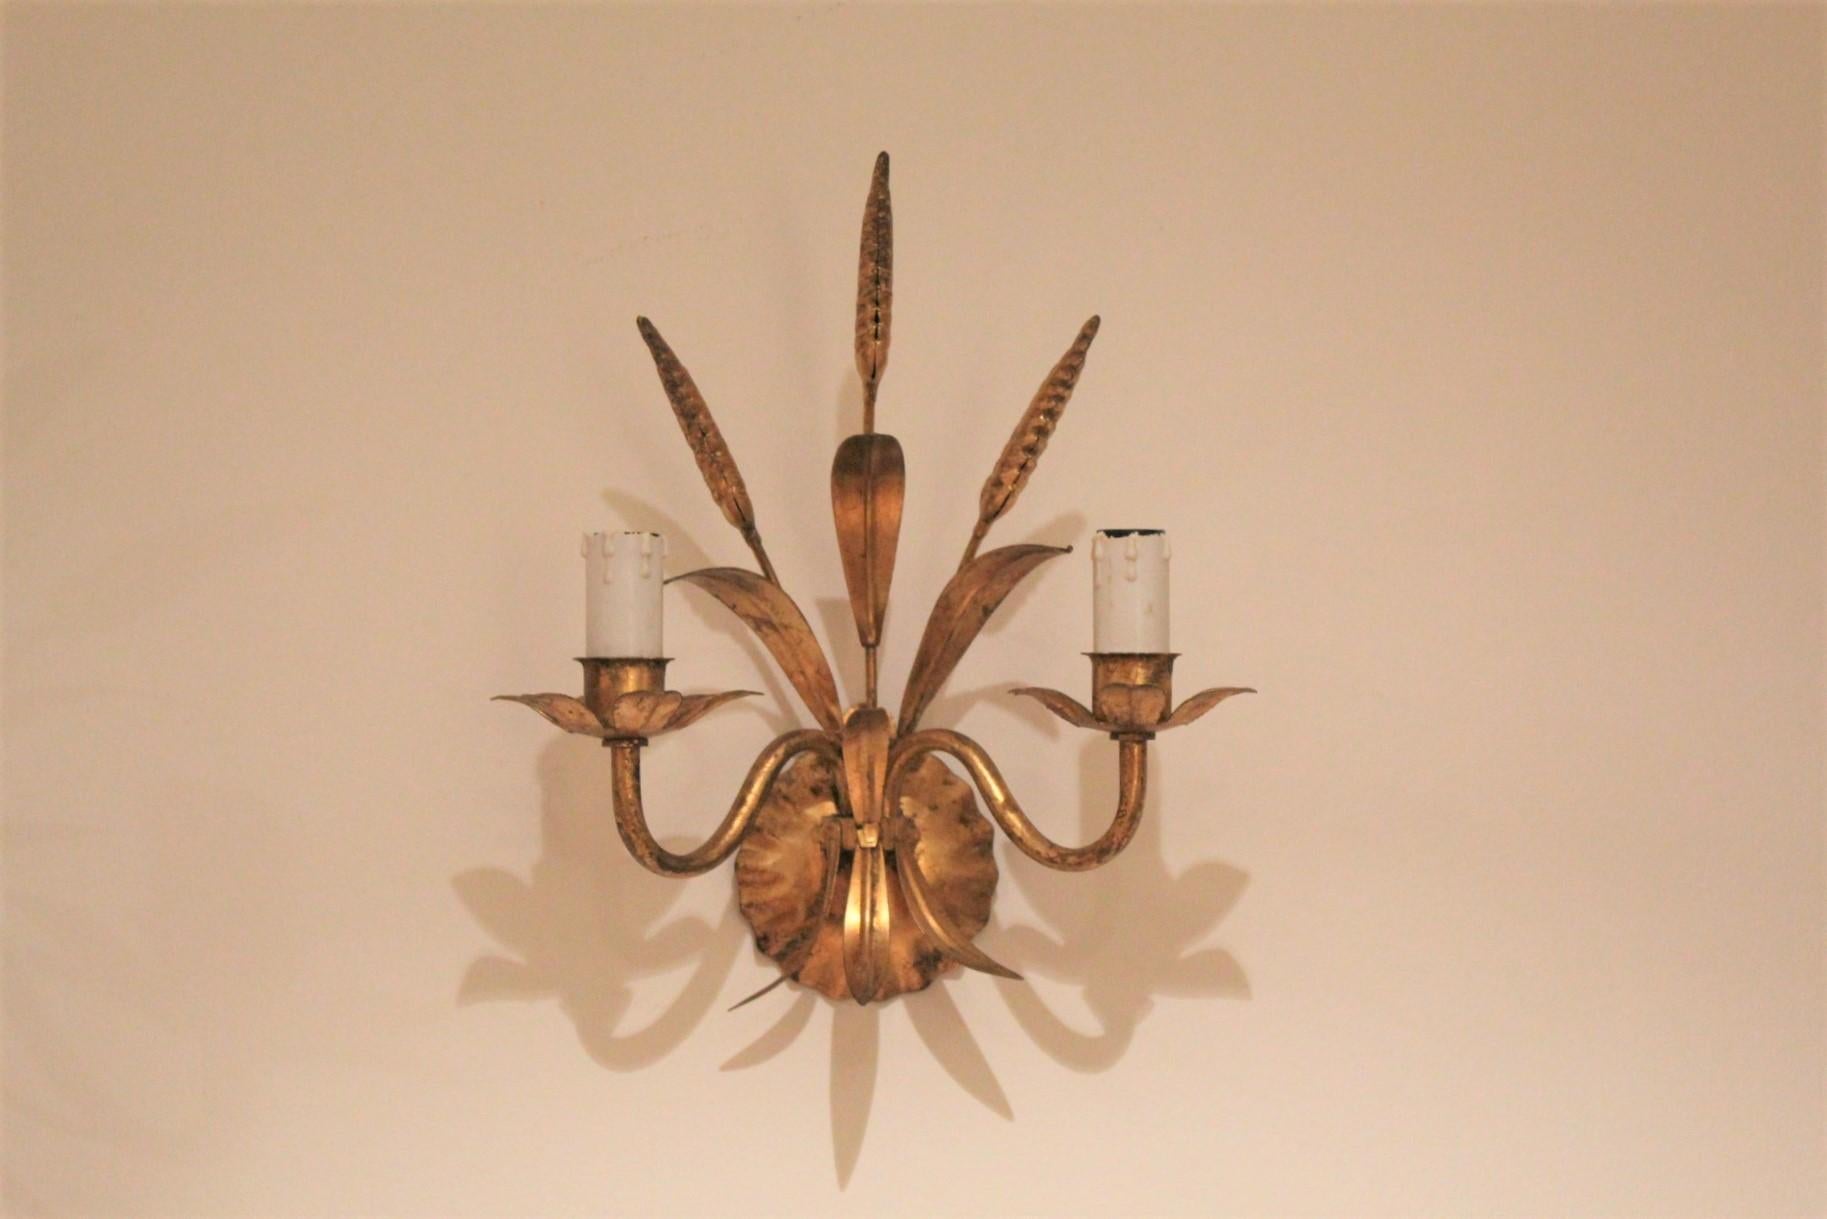 Set of 8 gilt metal wall lights with wheat-sheaf design
All rewired and fully tested
4 doubles 10